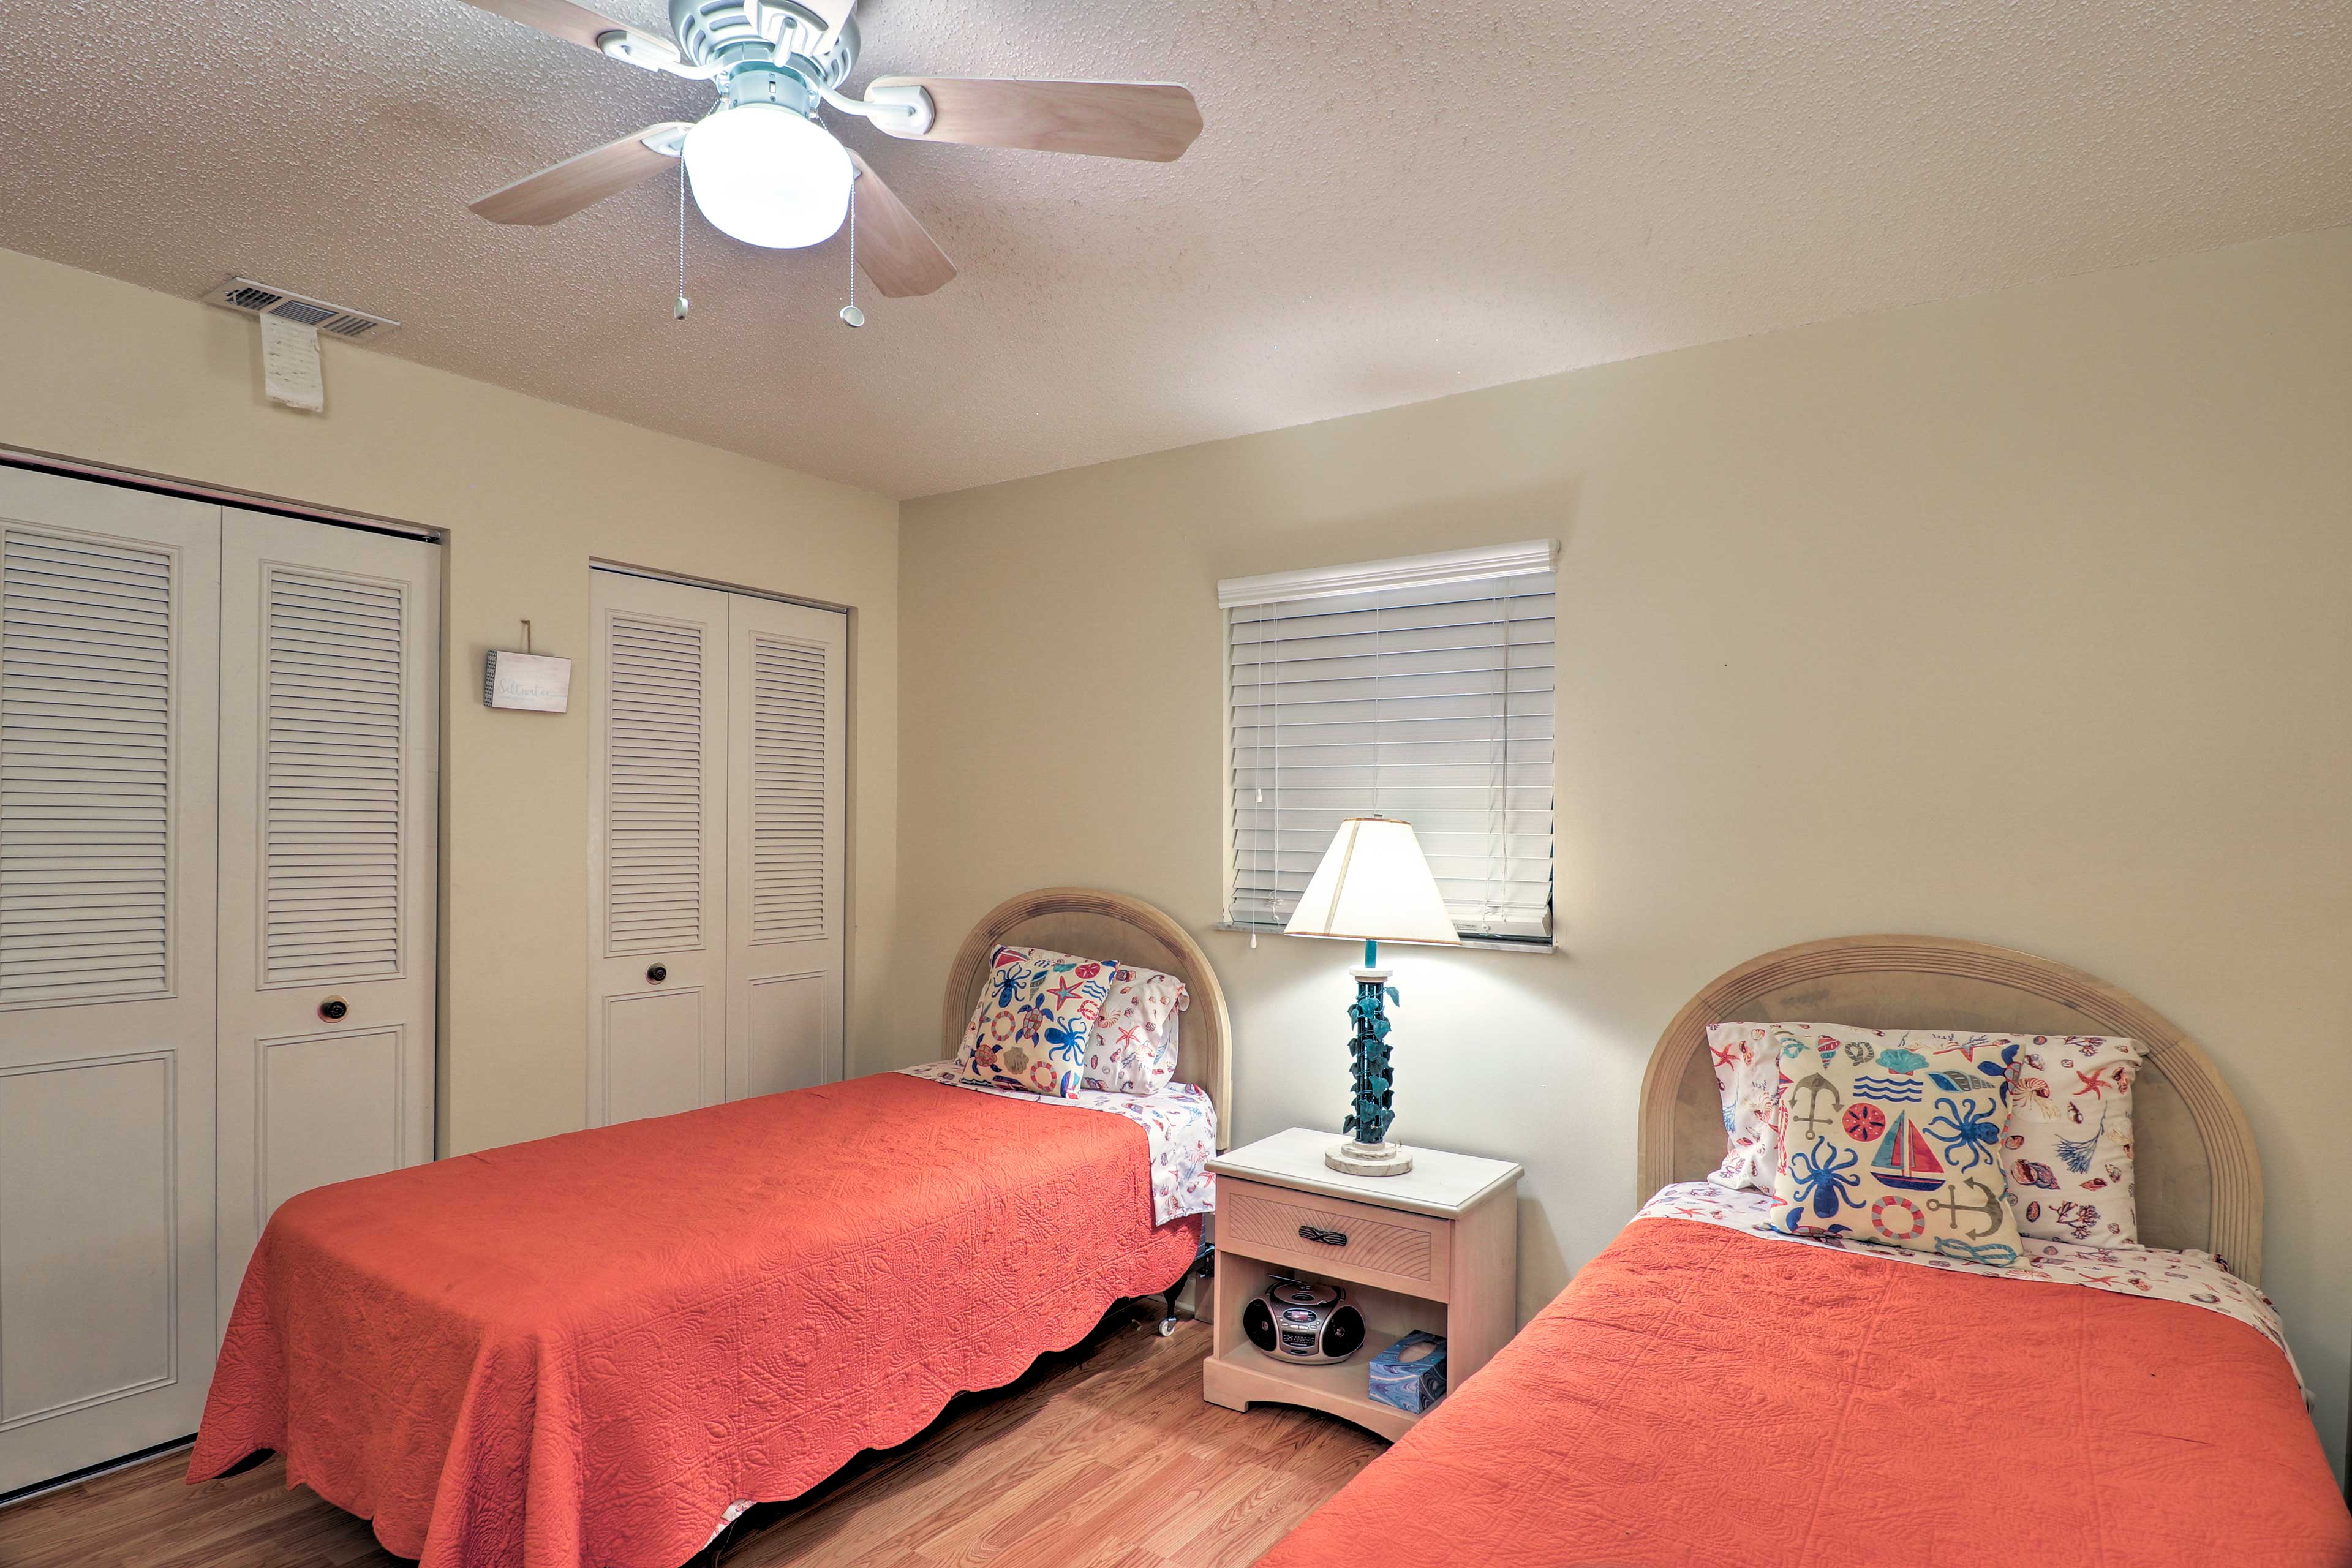 The second bedroom hosts 2 twin beds.